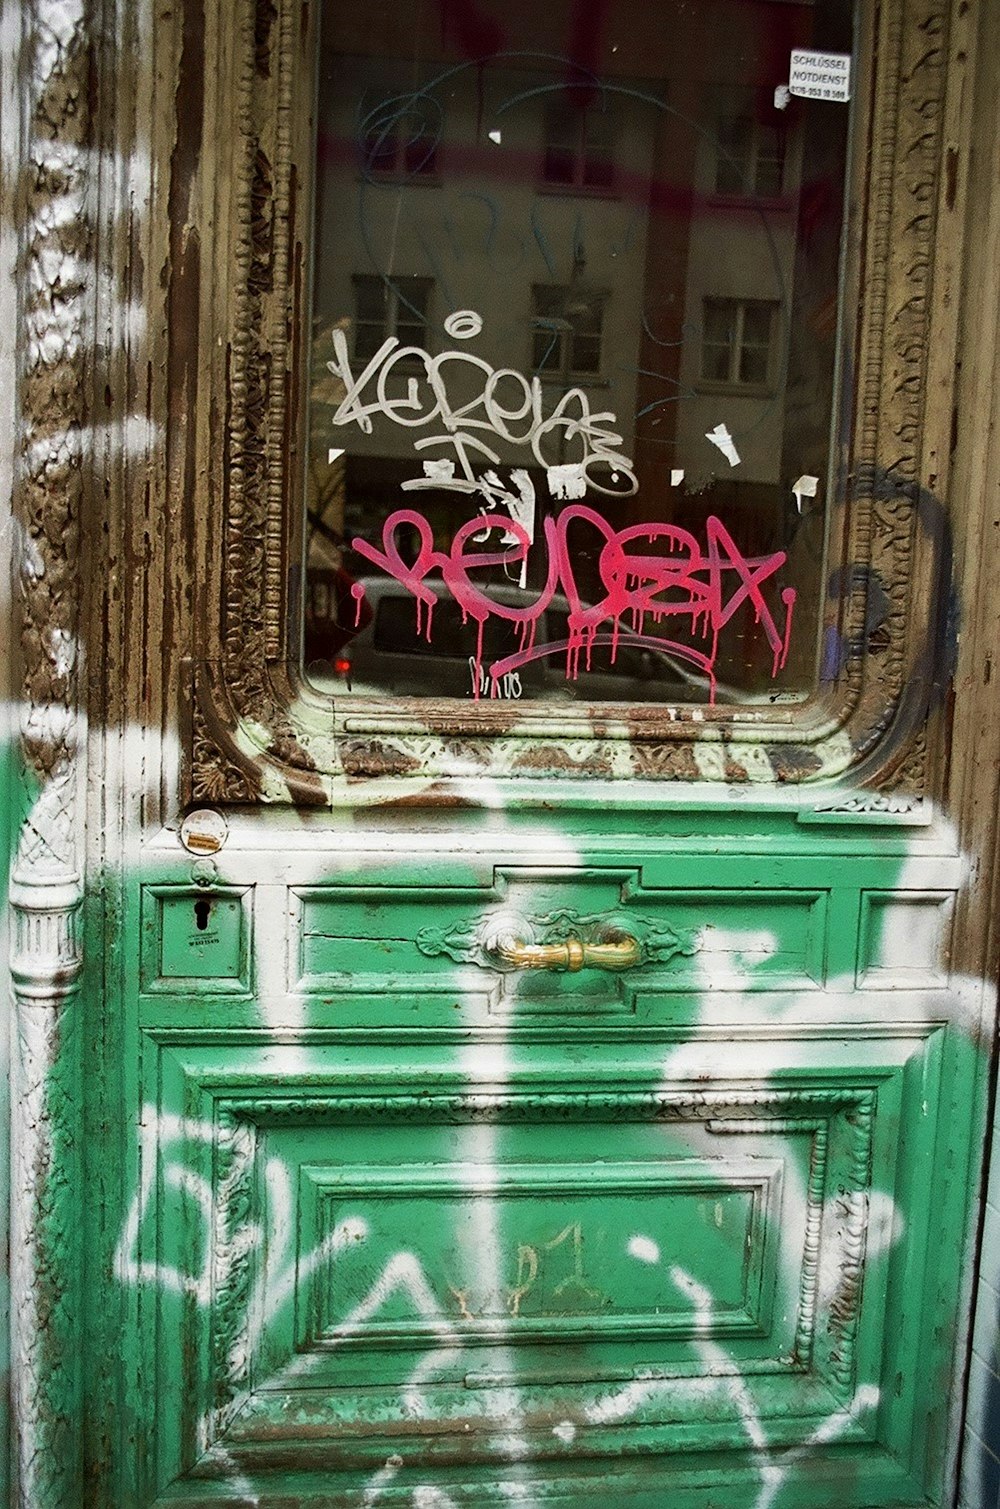 a green dresser with graffiti on it in front of a window